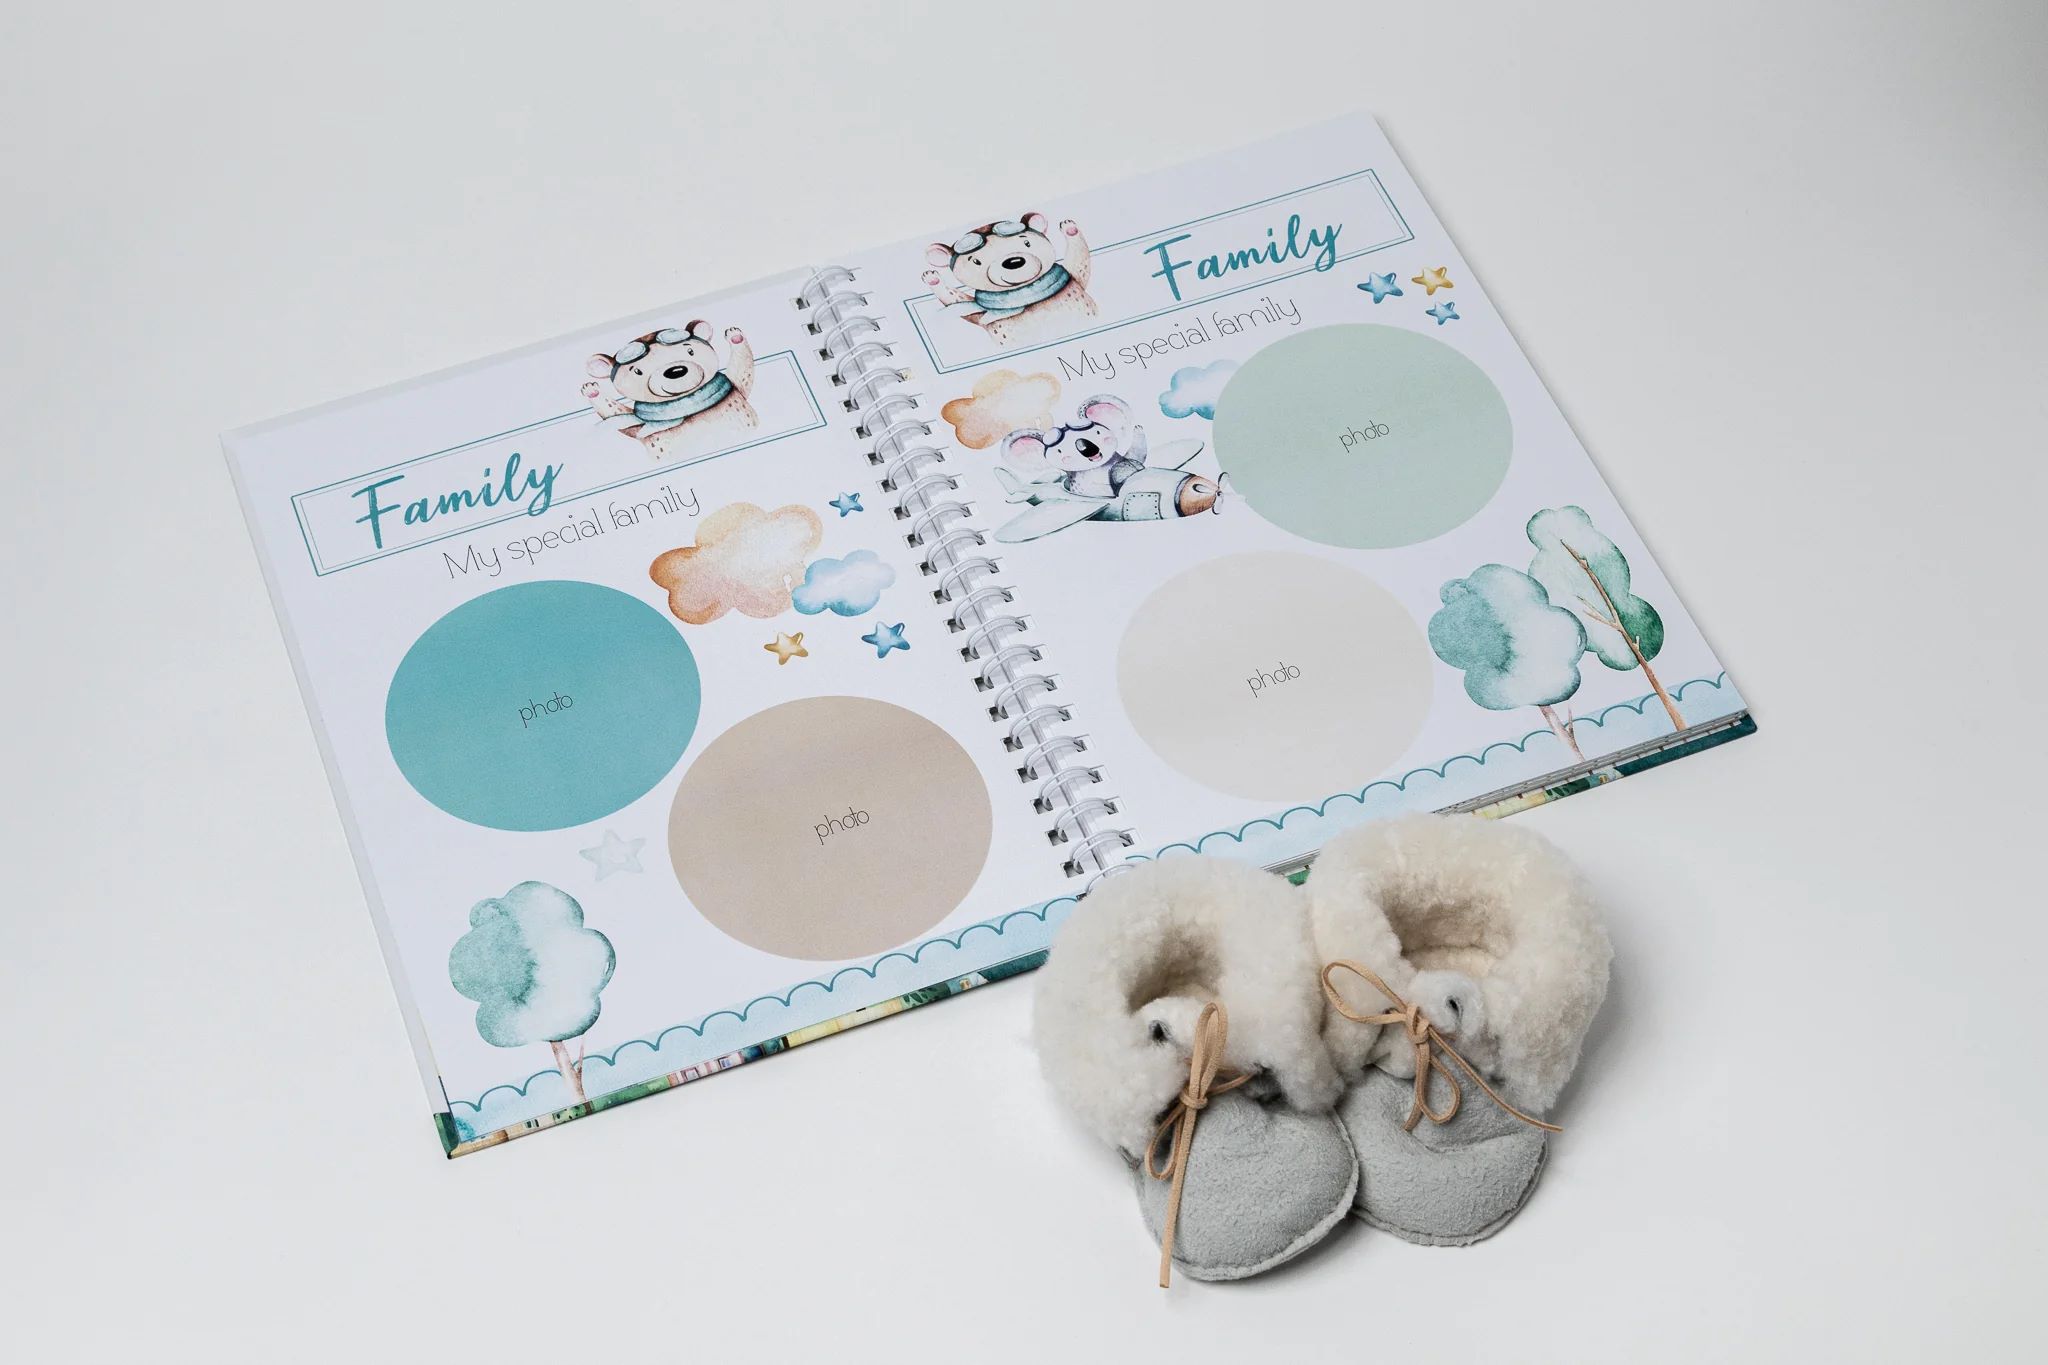 Baby Journal Review: A Must-Have for Cherishing Precious Memories